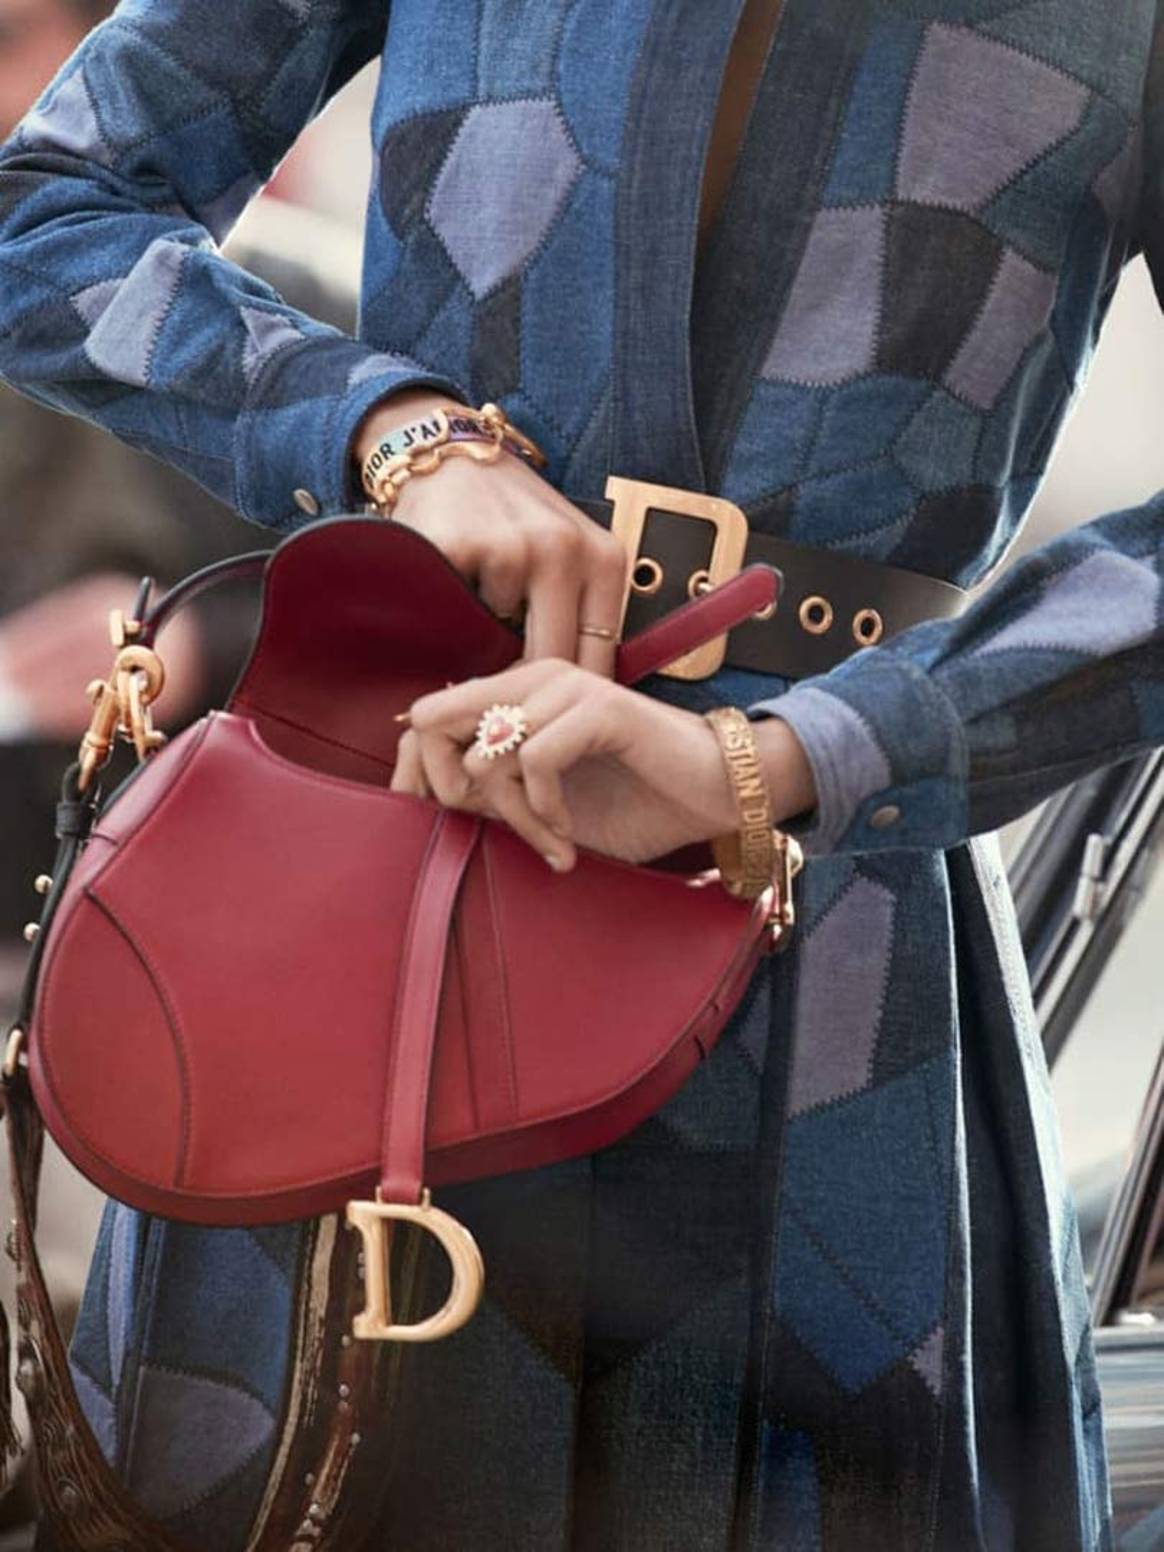 Dior’s saddle bag returns after almost two decades